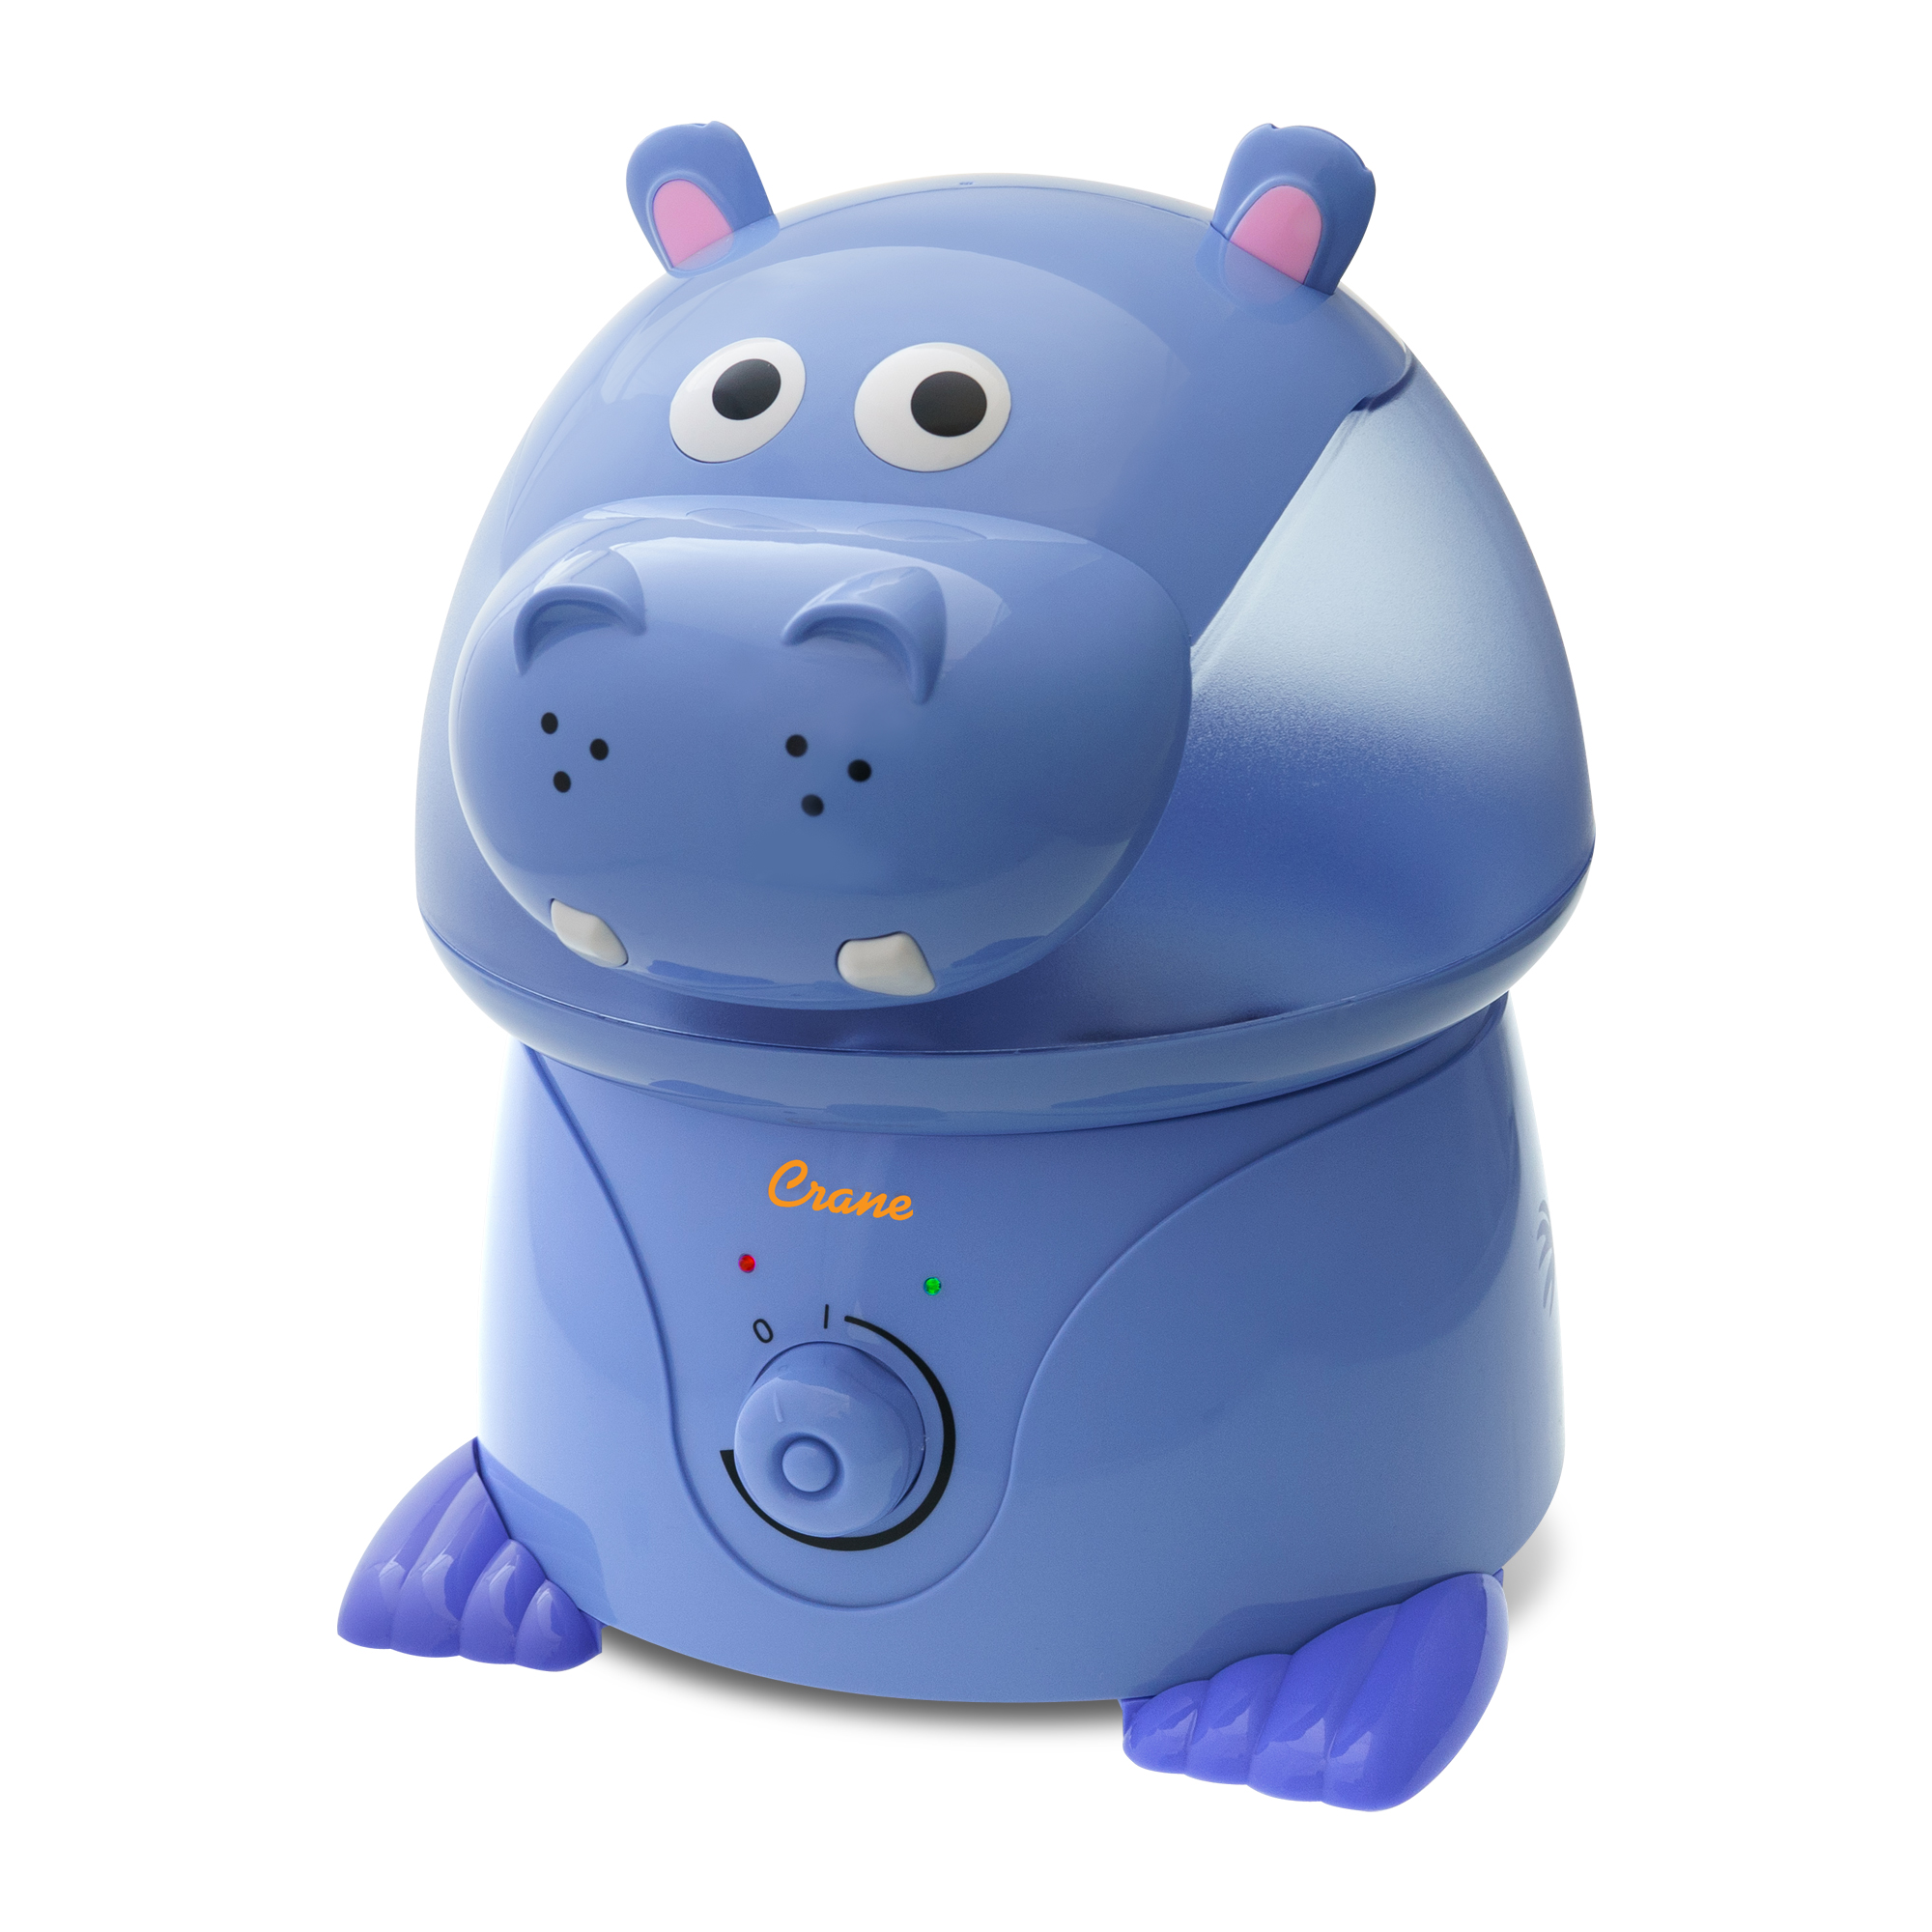 Crane Adorable 1 Gallon Ultrasonic Cool Mist Humidifier with 24 Hour Run Time - Hippo - EE-8245 - image 1 of 9